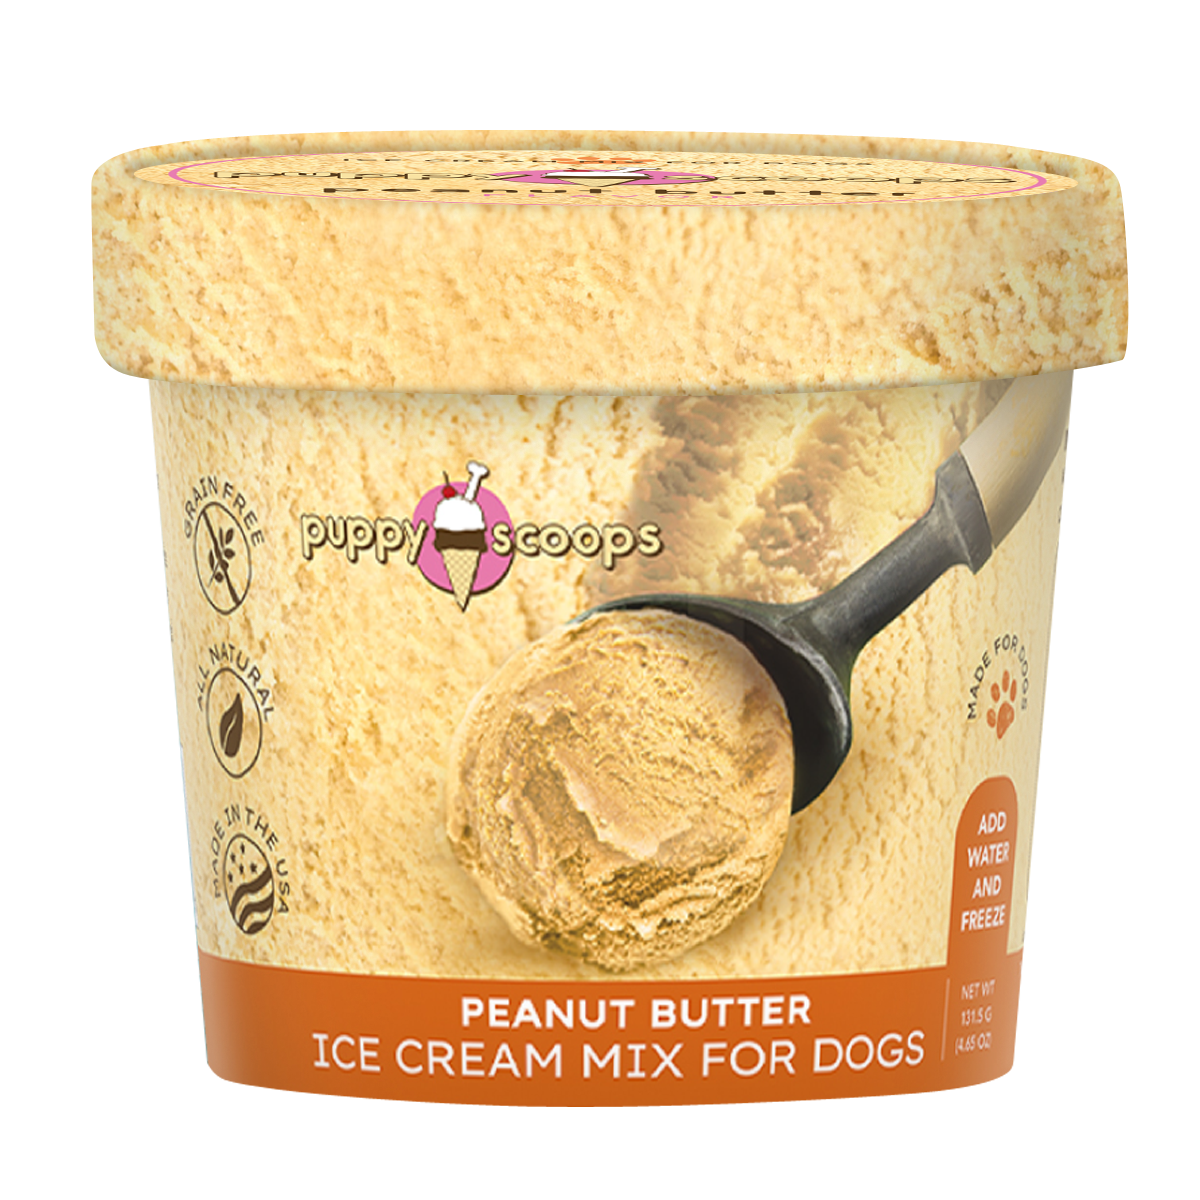 Puppy Scoops Ice Cream Mix for Dogs: Peanut Butter / 4.65 oz